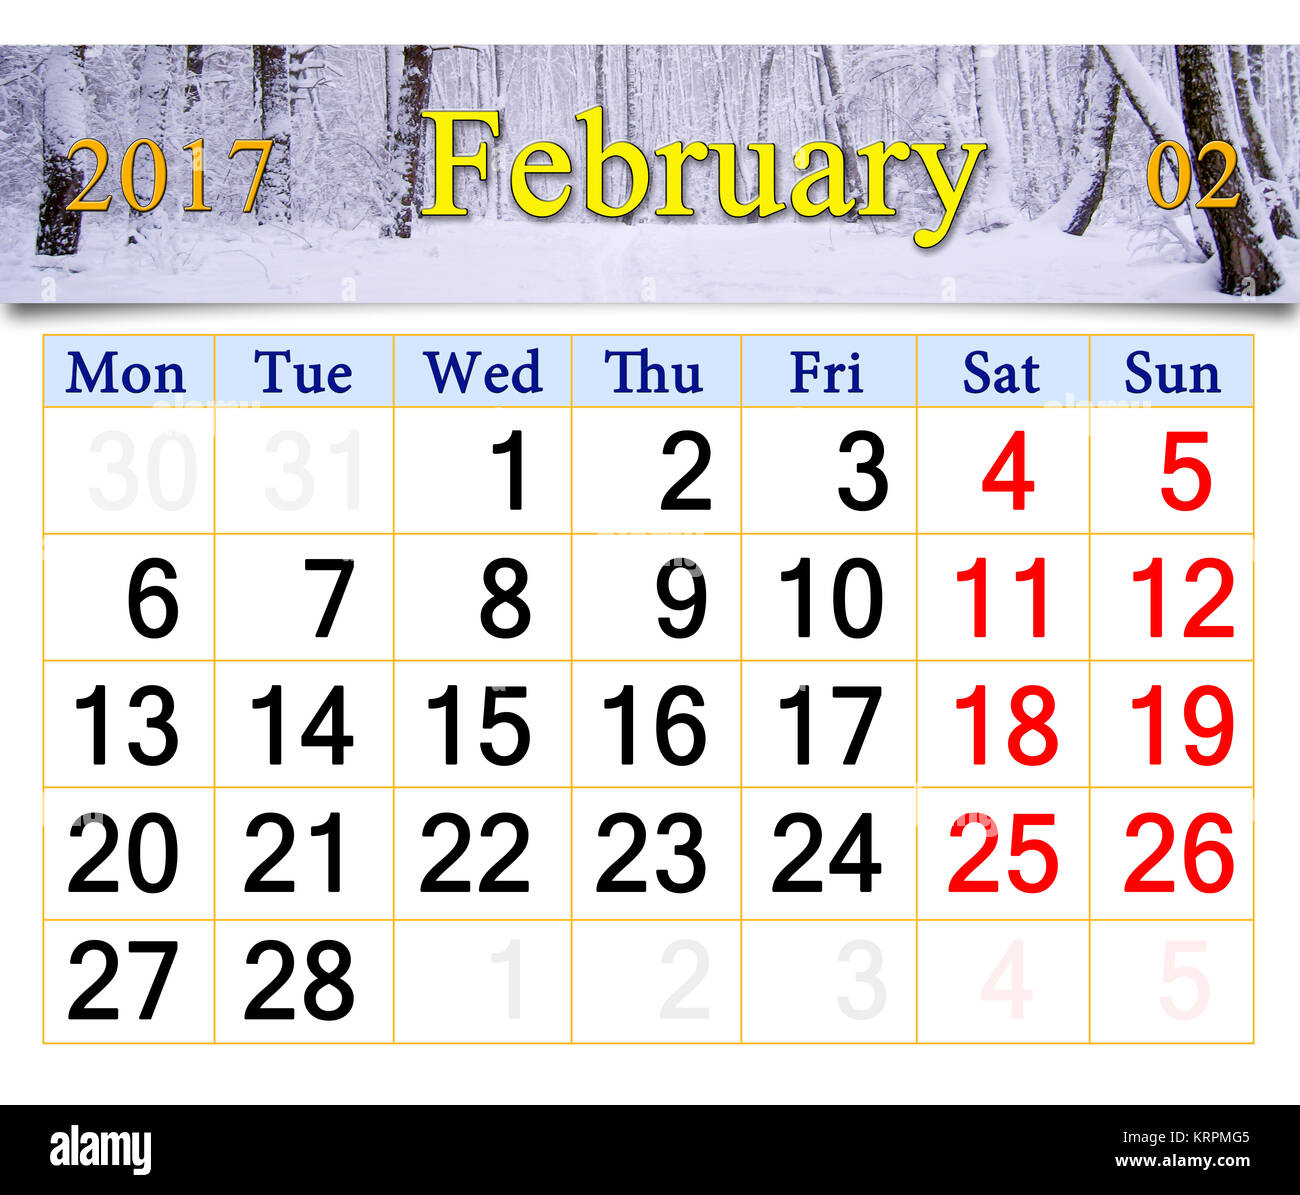 calendar for the February of 2017 with winter landscape Stock Photo